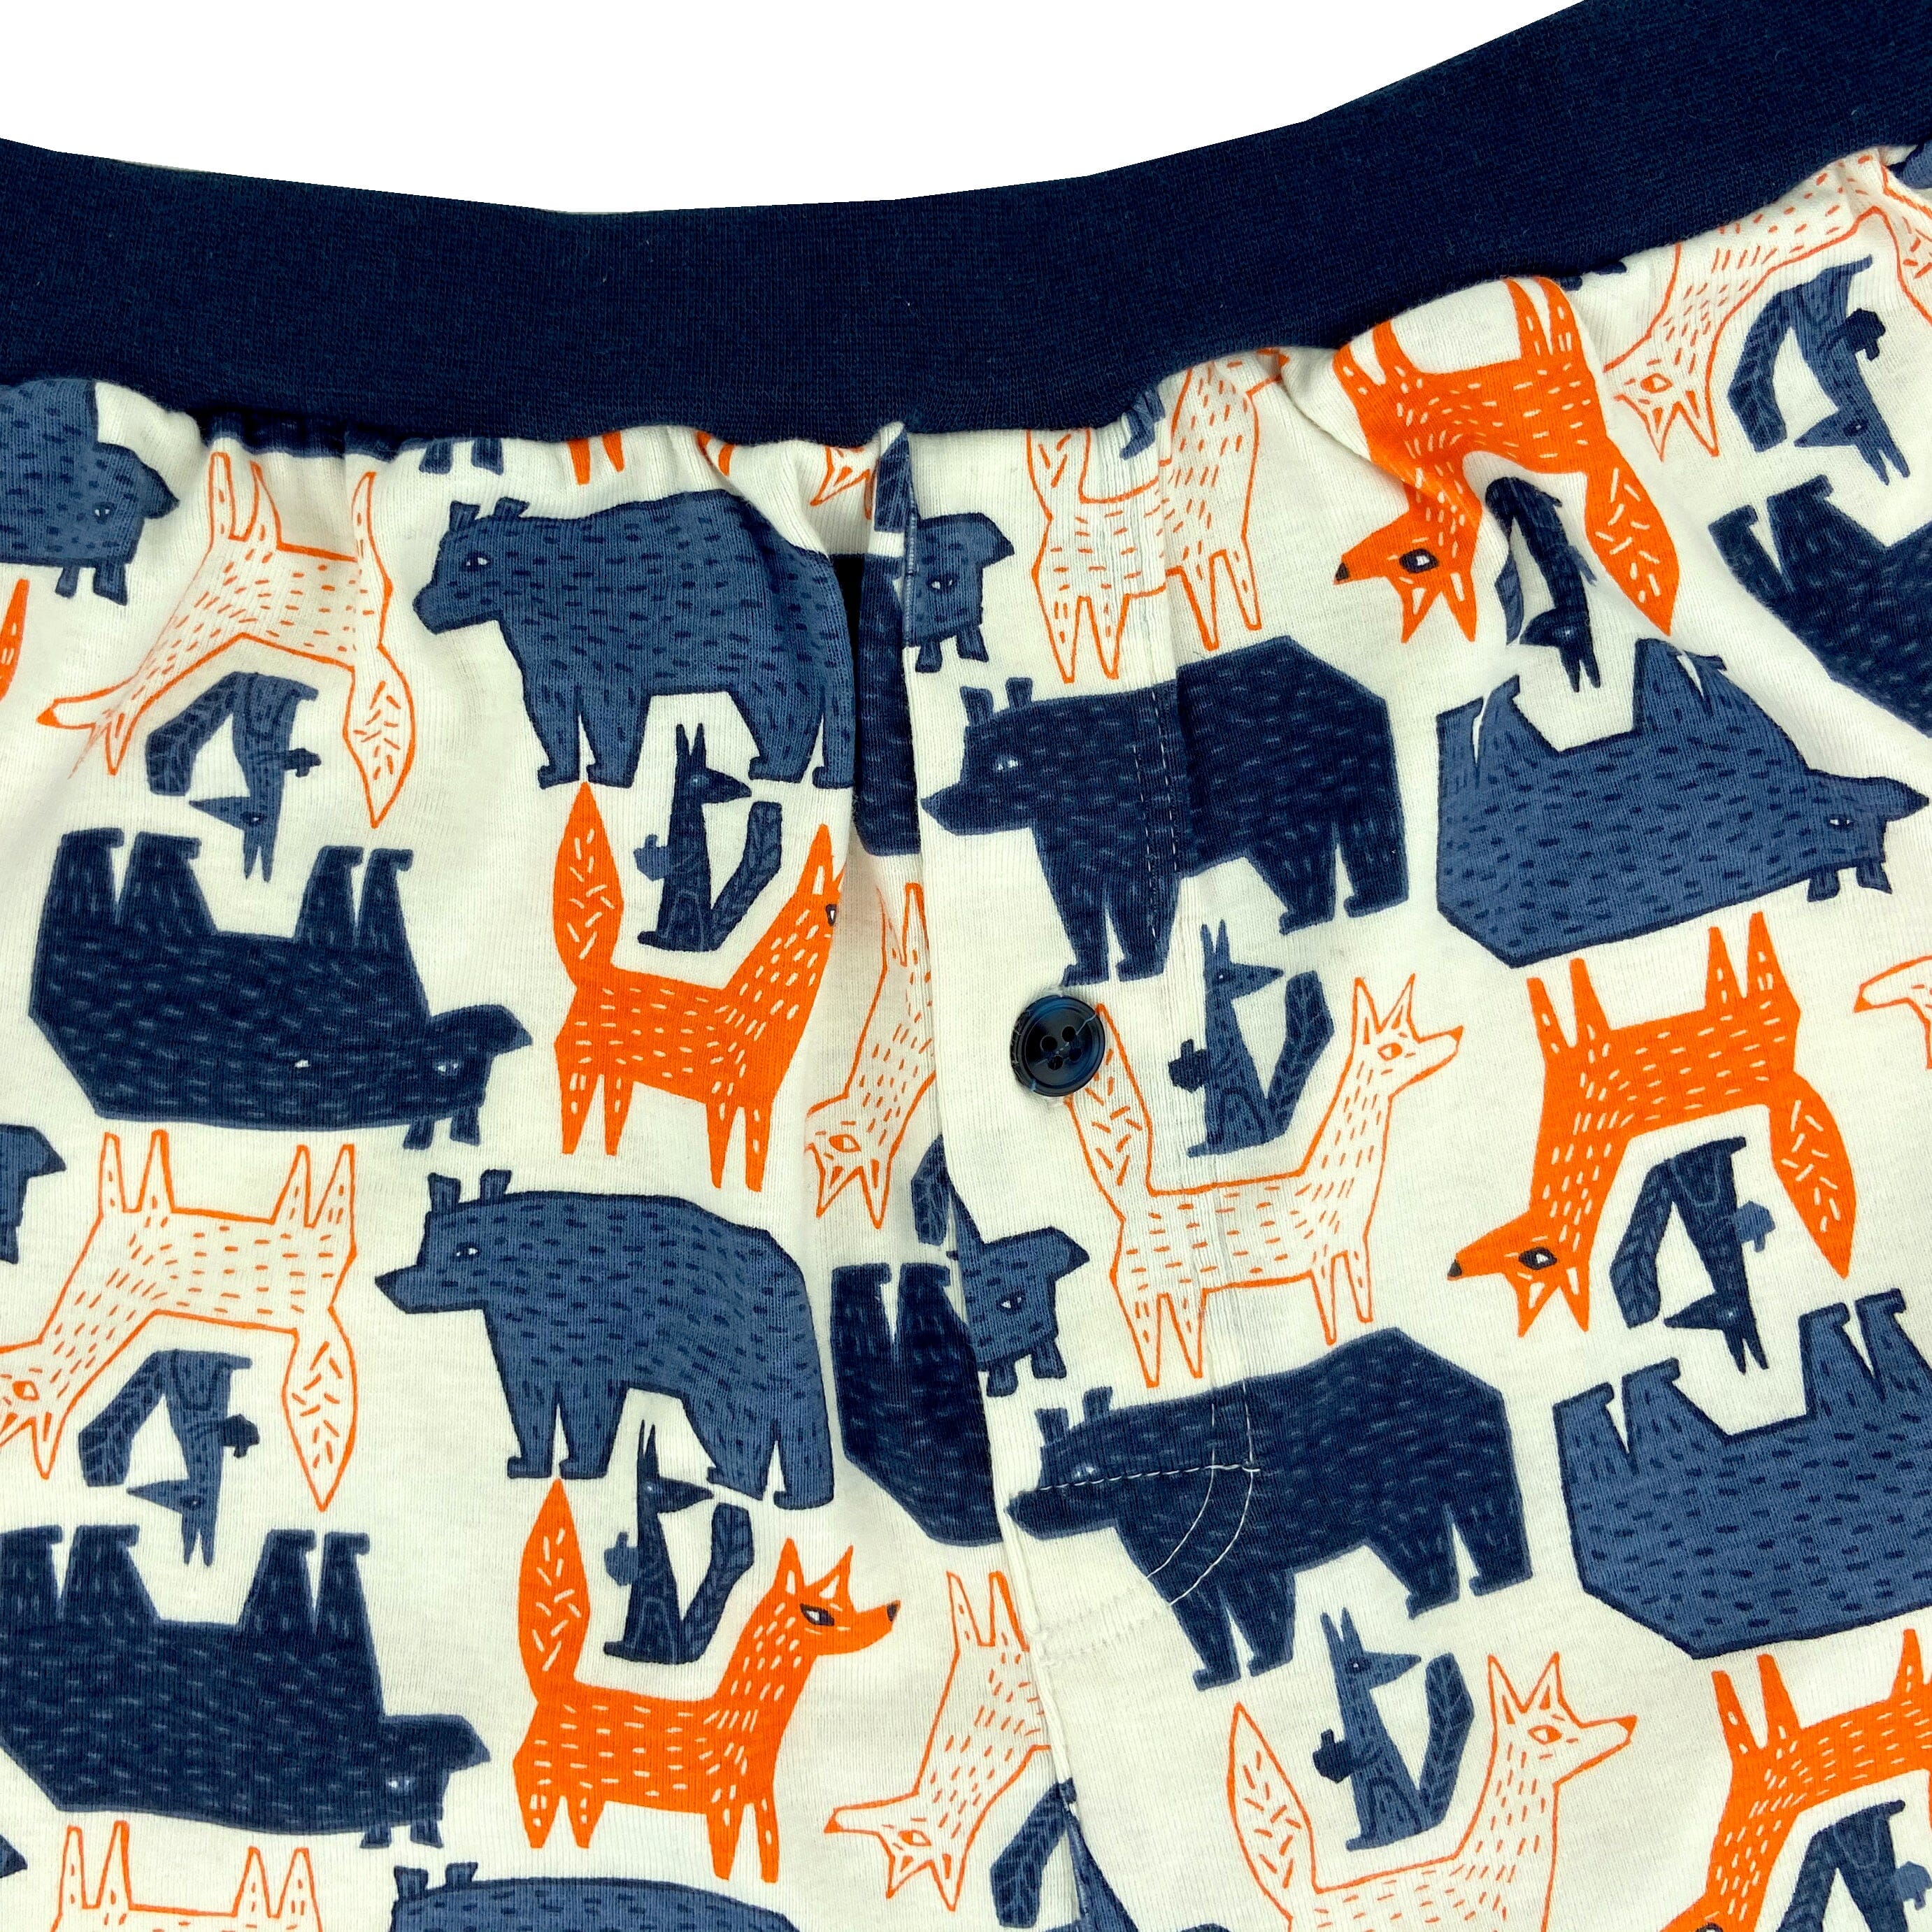 Comfy Cozy Cotton Knit Pajama Shorts with Boxer Button Fly in Bear and Fox Pattern